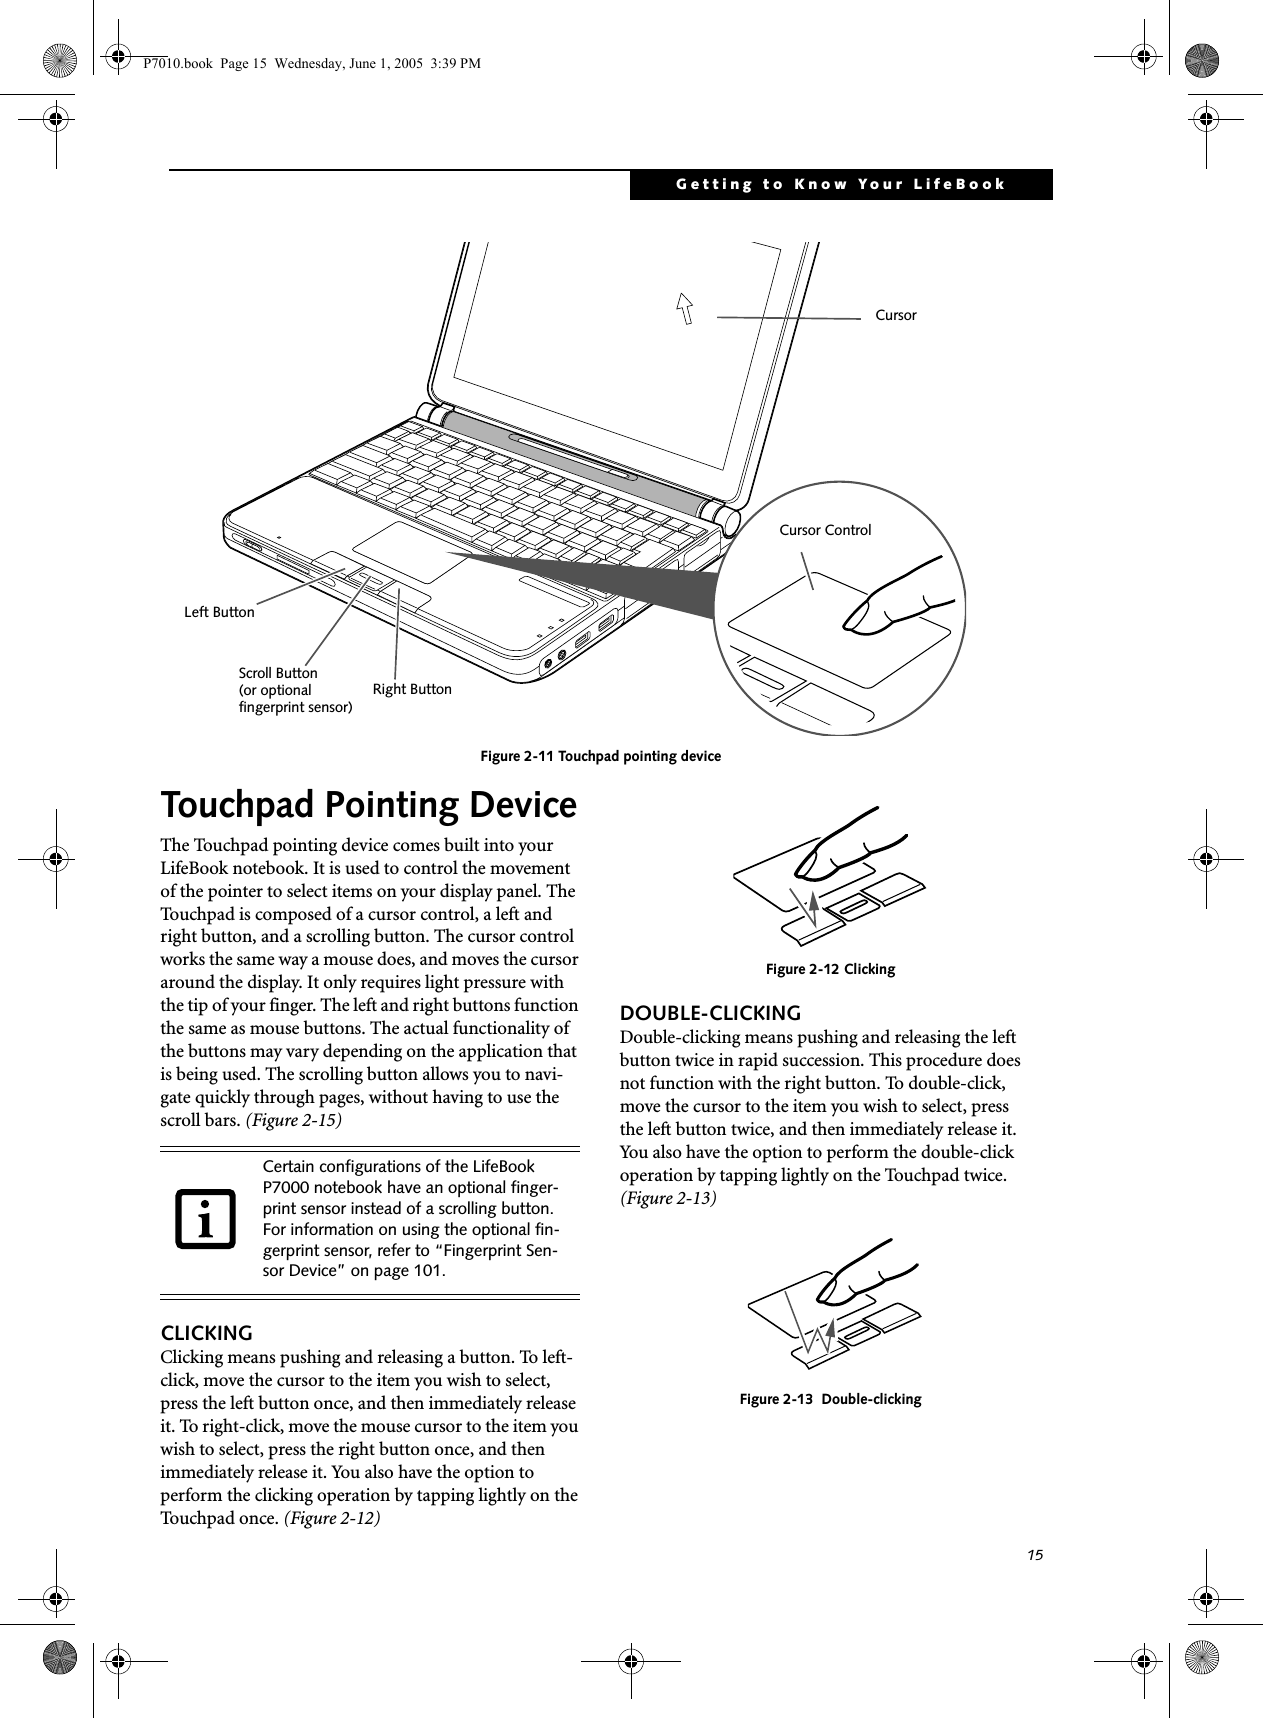 15Getting to Know Your LifeBookFigure 2-11 Touchpad pointing deviceTouchpad Pointing DeviceThe Touchpad pointing device comes built into your LifeBook notebook. It is used to control the movement of the pointer to select items on your display panel. The Touchpad is composed of a cursor control, a left and right button, and a scrolling button. The cursor control works the same way a mouse does, and moves the cursor around the display. It only requires light pressure with the tip of your finger. The left and right buttons function the same as mouse buttons. The actual functionality of the buttons may vary depending on the application that is being used. The scrolling button allows you to navi-gate quickly through pages, without having to use the scroll bars. (Figure 2-15)CLICKINGClicking means pushing and releasing a button. To left-click, move the cursor to the item you wish to select, press the left button once, and then immediately release it. To right-click, move the mouse cursor to the item you wish to select, press the right button once, and then immediately release it. You also have the option to perform the clicking operation by tapping lightly on the Touchpad once. (Figure 2-12)Figure 2-12 ClickingDOUBLE-CLICKINGDouble-clicking means pushing and releasing the left button twice in rapid succession. This procedure does not function with the right button. To double-click, move the cursor to the item you wish to select, press the left button twice, and then immediately release it. You also have the option to perform the double-click operation by tapping lightly on the Touchpad twice. (Figure 2-13)Figure 2-13  Double-clickingCursor ControlLeft ButtonRight ButtonScroll ButtonCursor(or optionalfingerprint sensor)Certain configurations of the LifeBook P7000 notebook have an optional finger-print sensor instead of a scrolling button. For information on using the optional fin-gerprint sensor, refer to “Fingerprint Sen-sor Device” on page 101.P7010.book  Page 15  Wednesday, June 1, 2005  3:39 PM